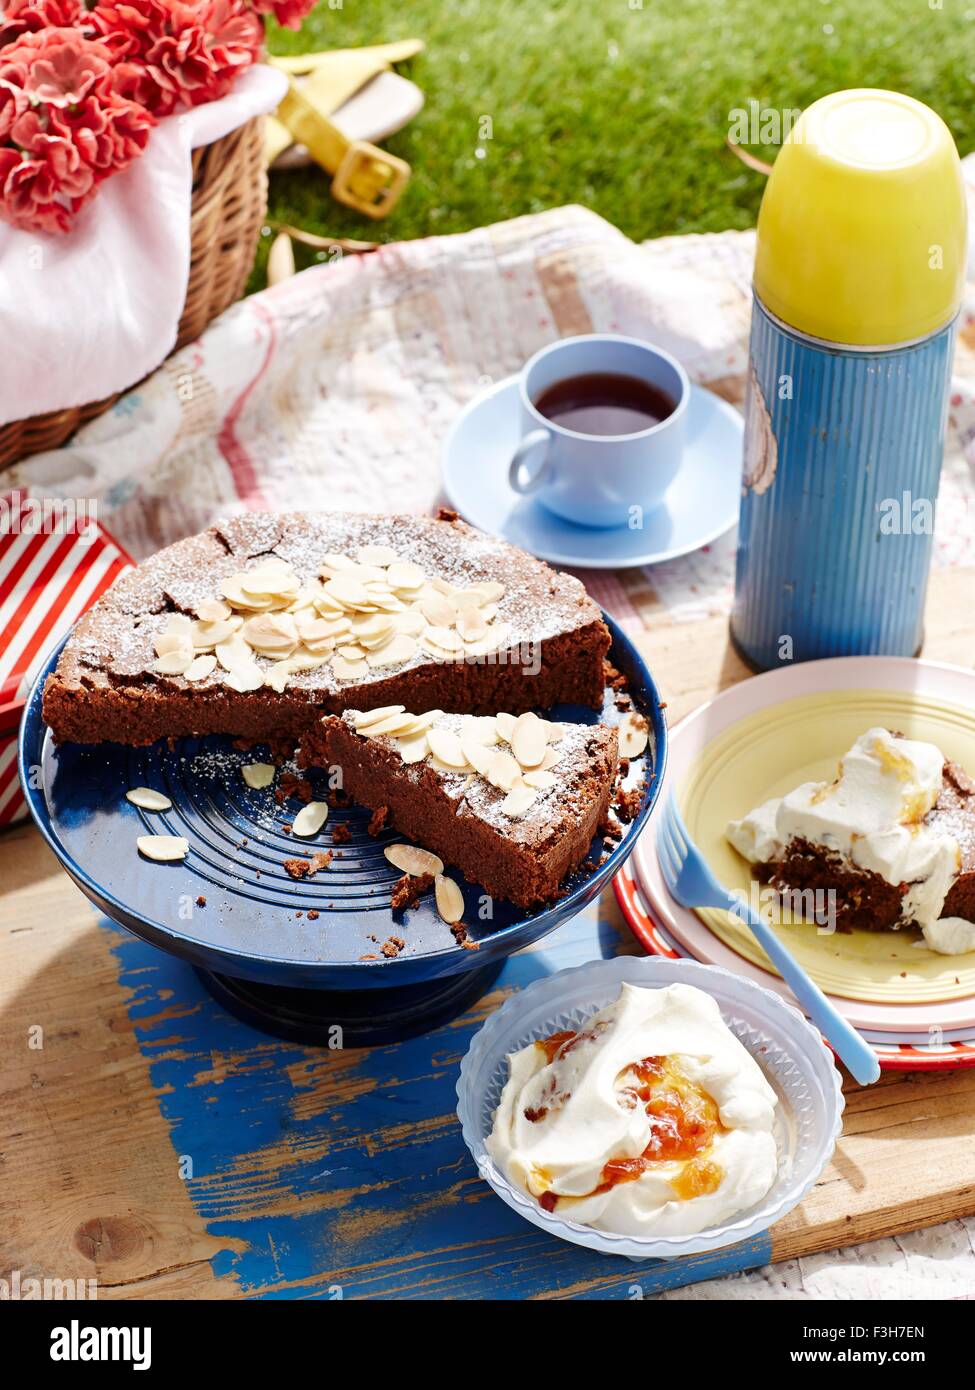 Chocolate cake and drinks flask on picnic blanket, close-up Stock Photo